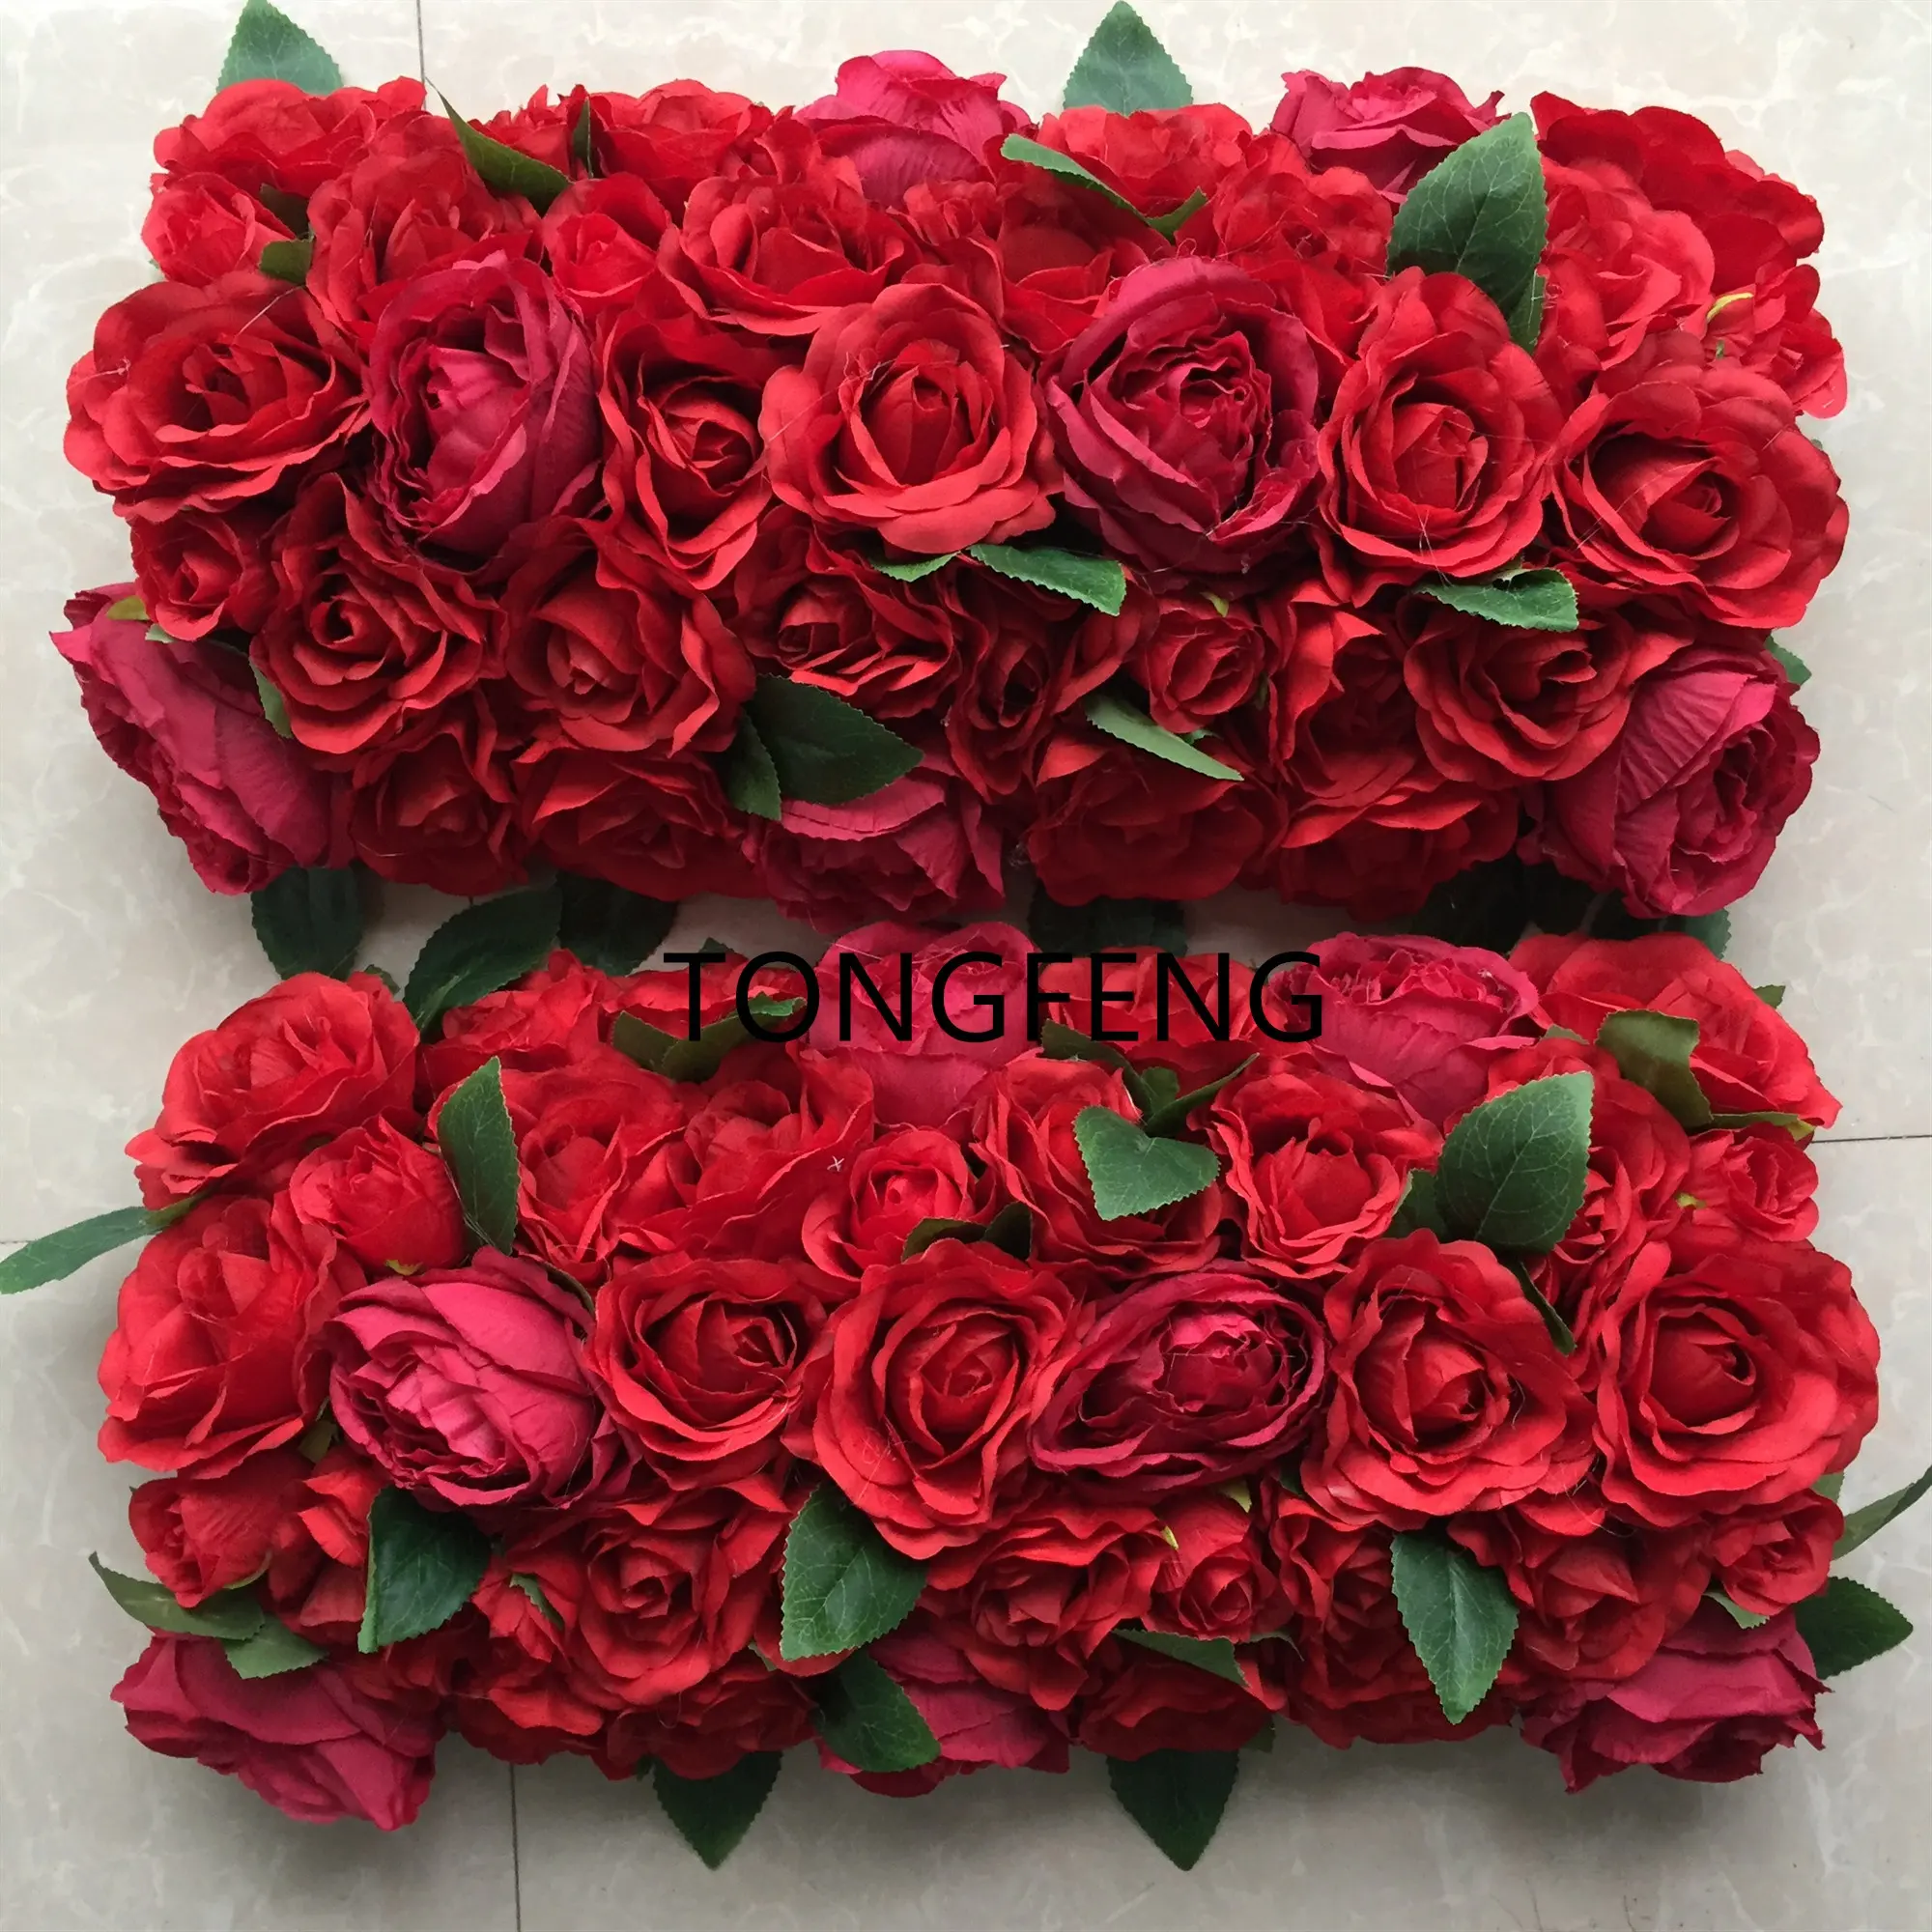 TONGFENG Red Fleurs Artificial Wreaths Plants 3D Backdrop Decorative Flowers Row Panel Runner Arch Party Flower Wall Wedding